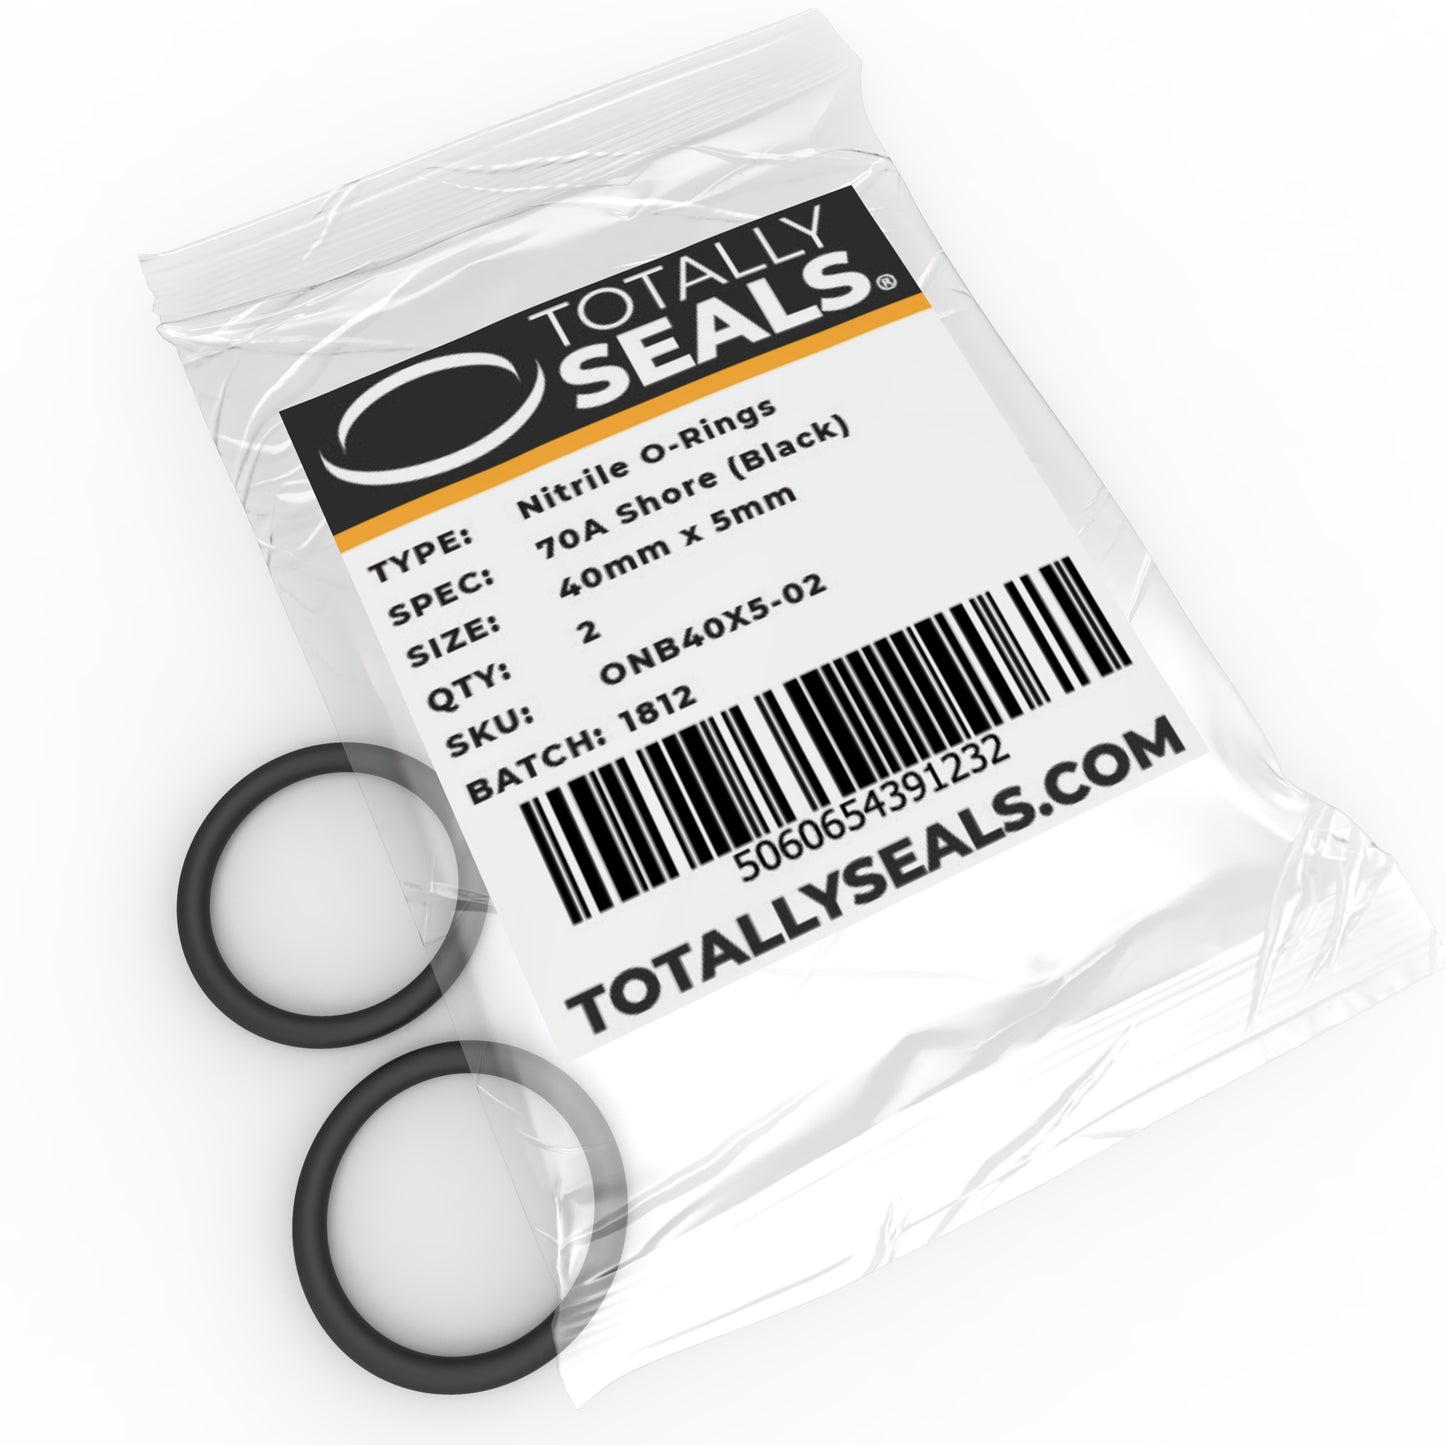 40mm x 5mm (50mm OD) Nitrile O-Rings - Totally Seals®